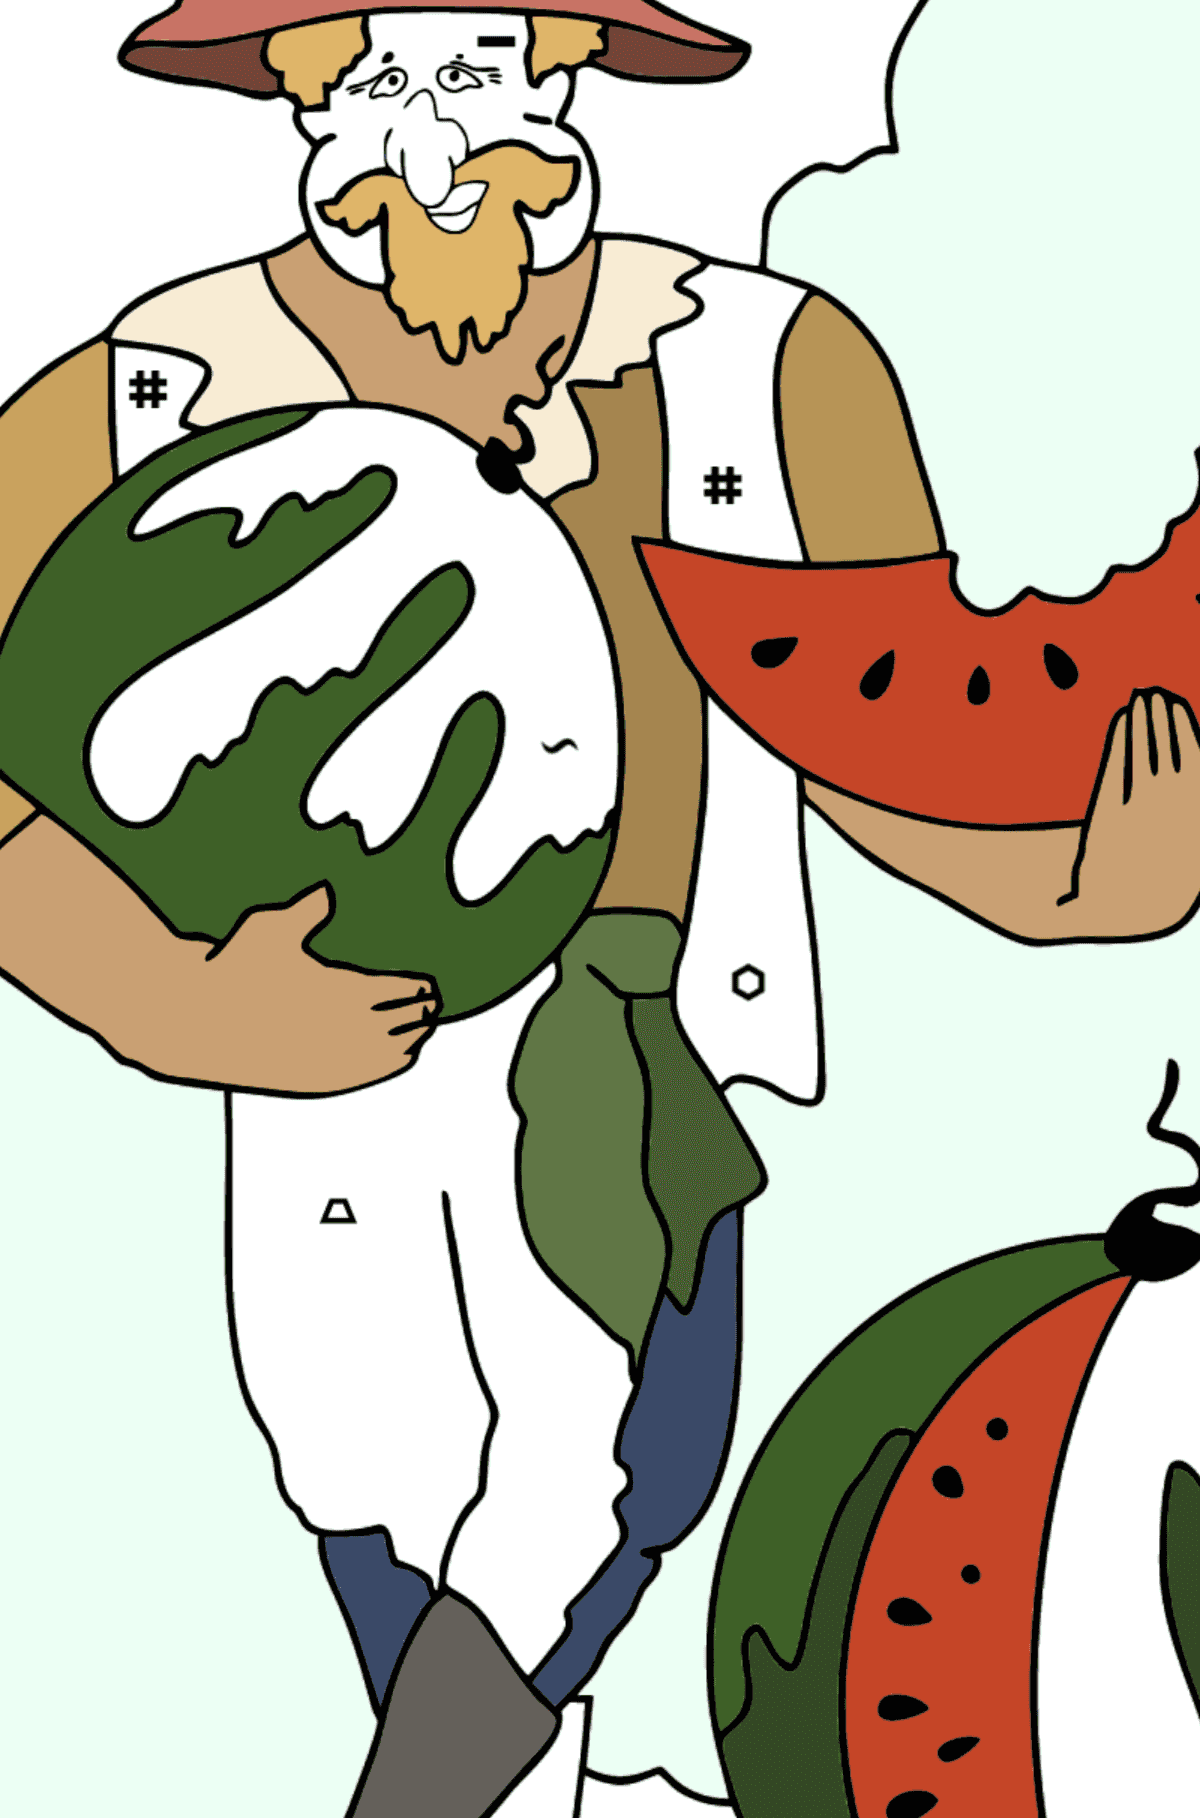 Coloring Page - A Pirate is Sharing a Ripe Watermelon - Coloring by Symbols and Geometric Shapes for Kids